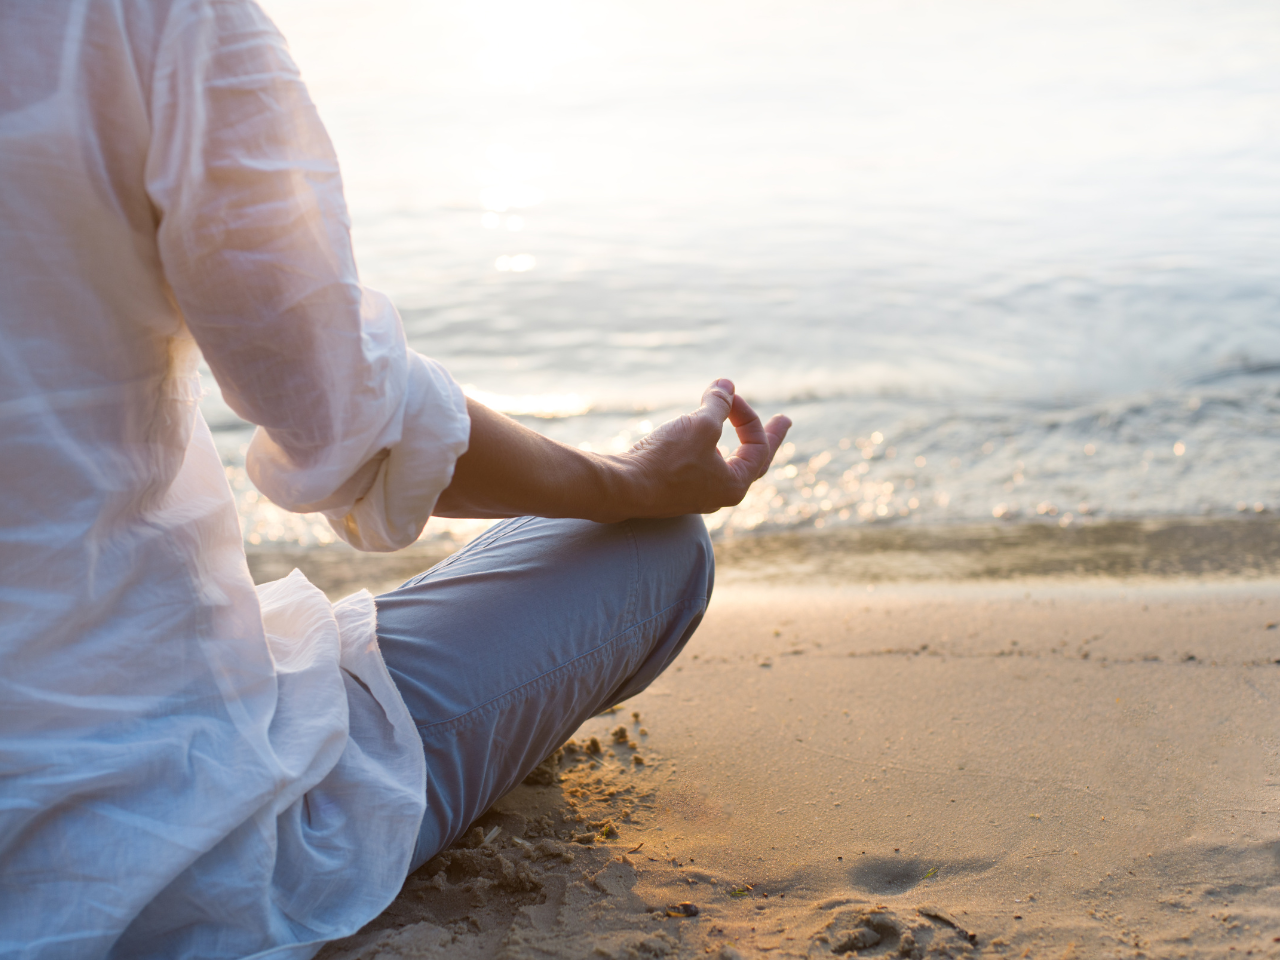 The Beginners Guide to Meditation